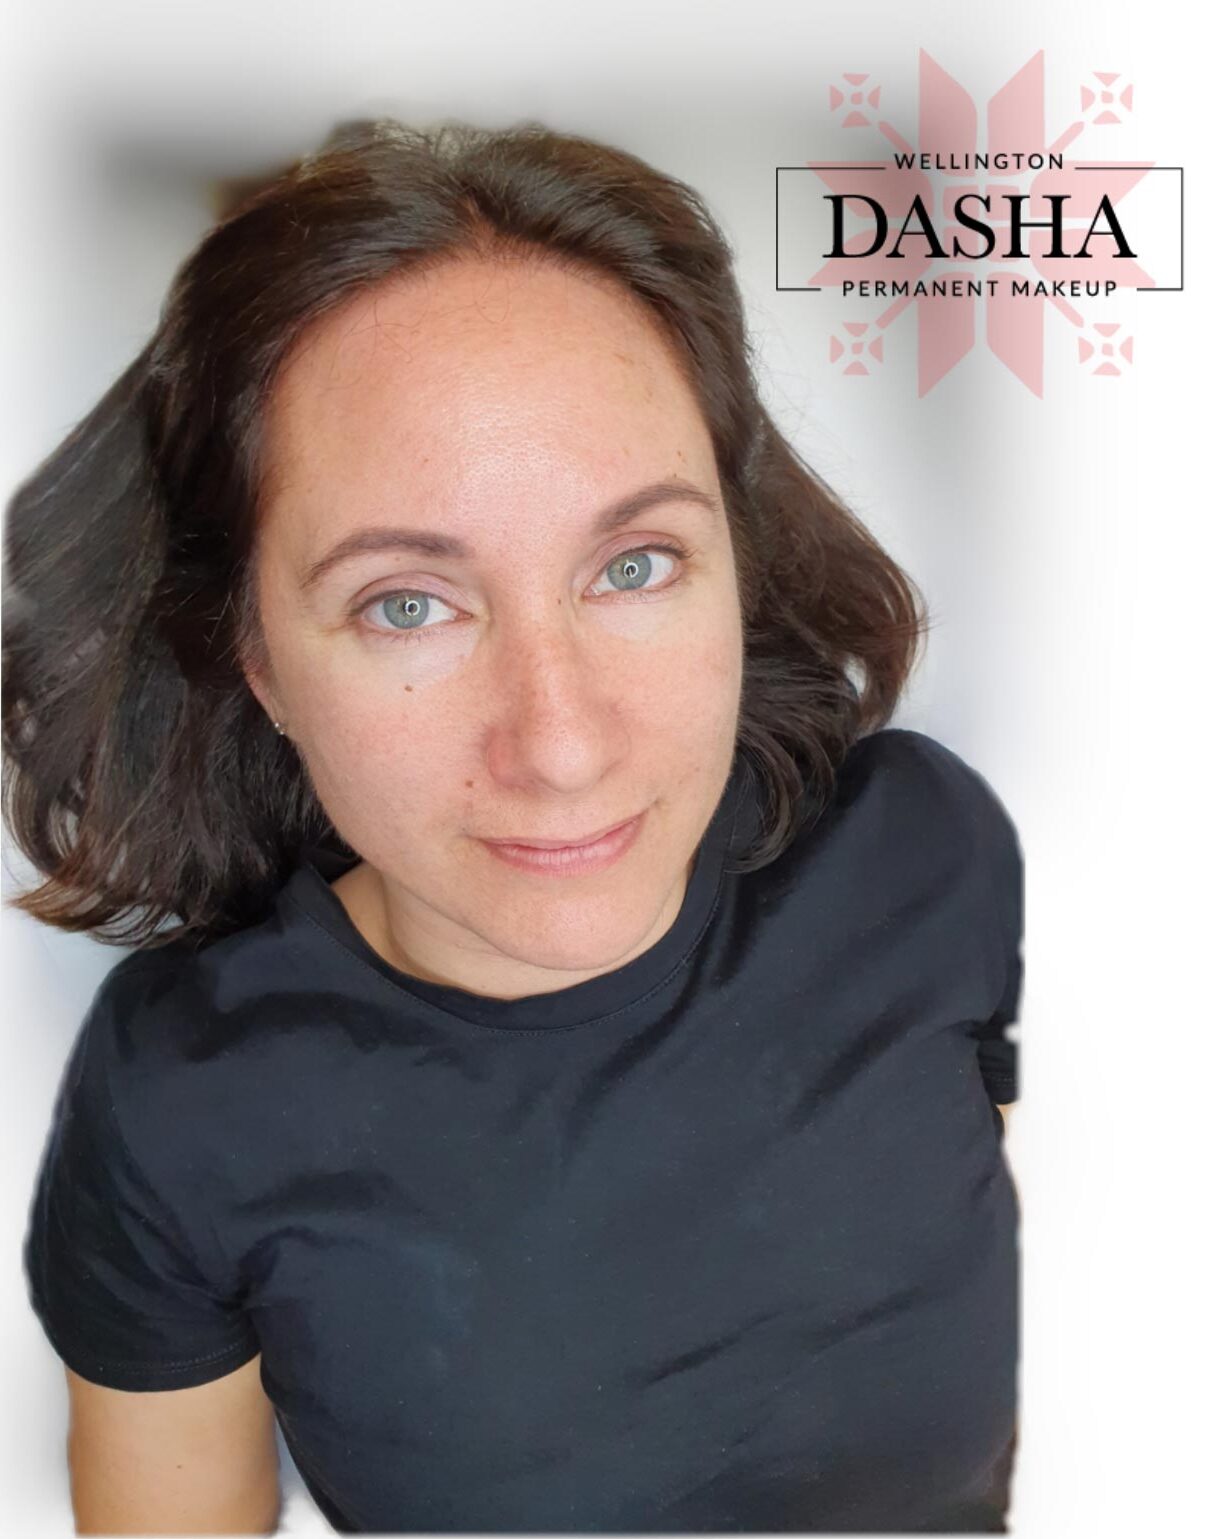 Eyebrows & LashLine Cosmetic Tattoo. Cosmetic and Mediical Tattoo by Dasha. Permanent makeup and reconstructive tattoo, scalp micro-pigmentation in Christchurch, New Zealand